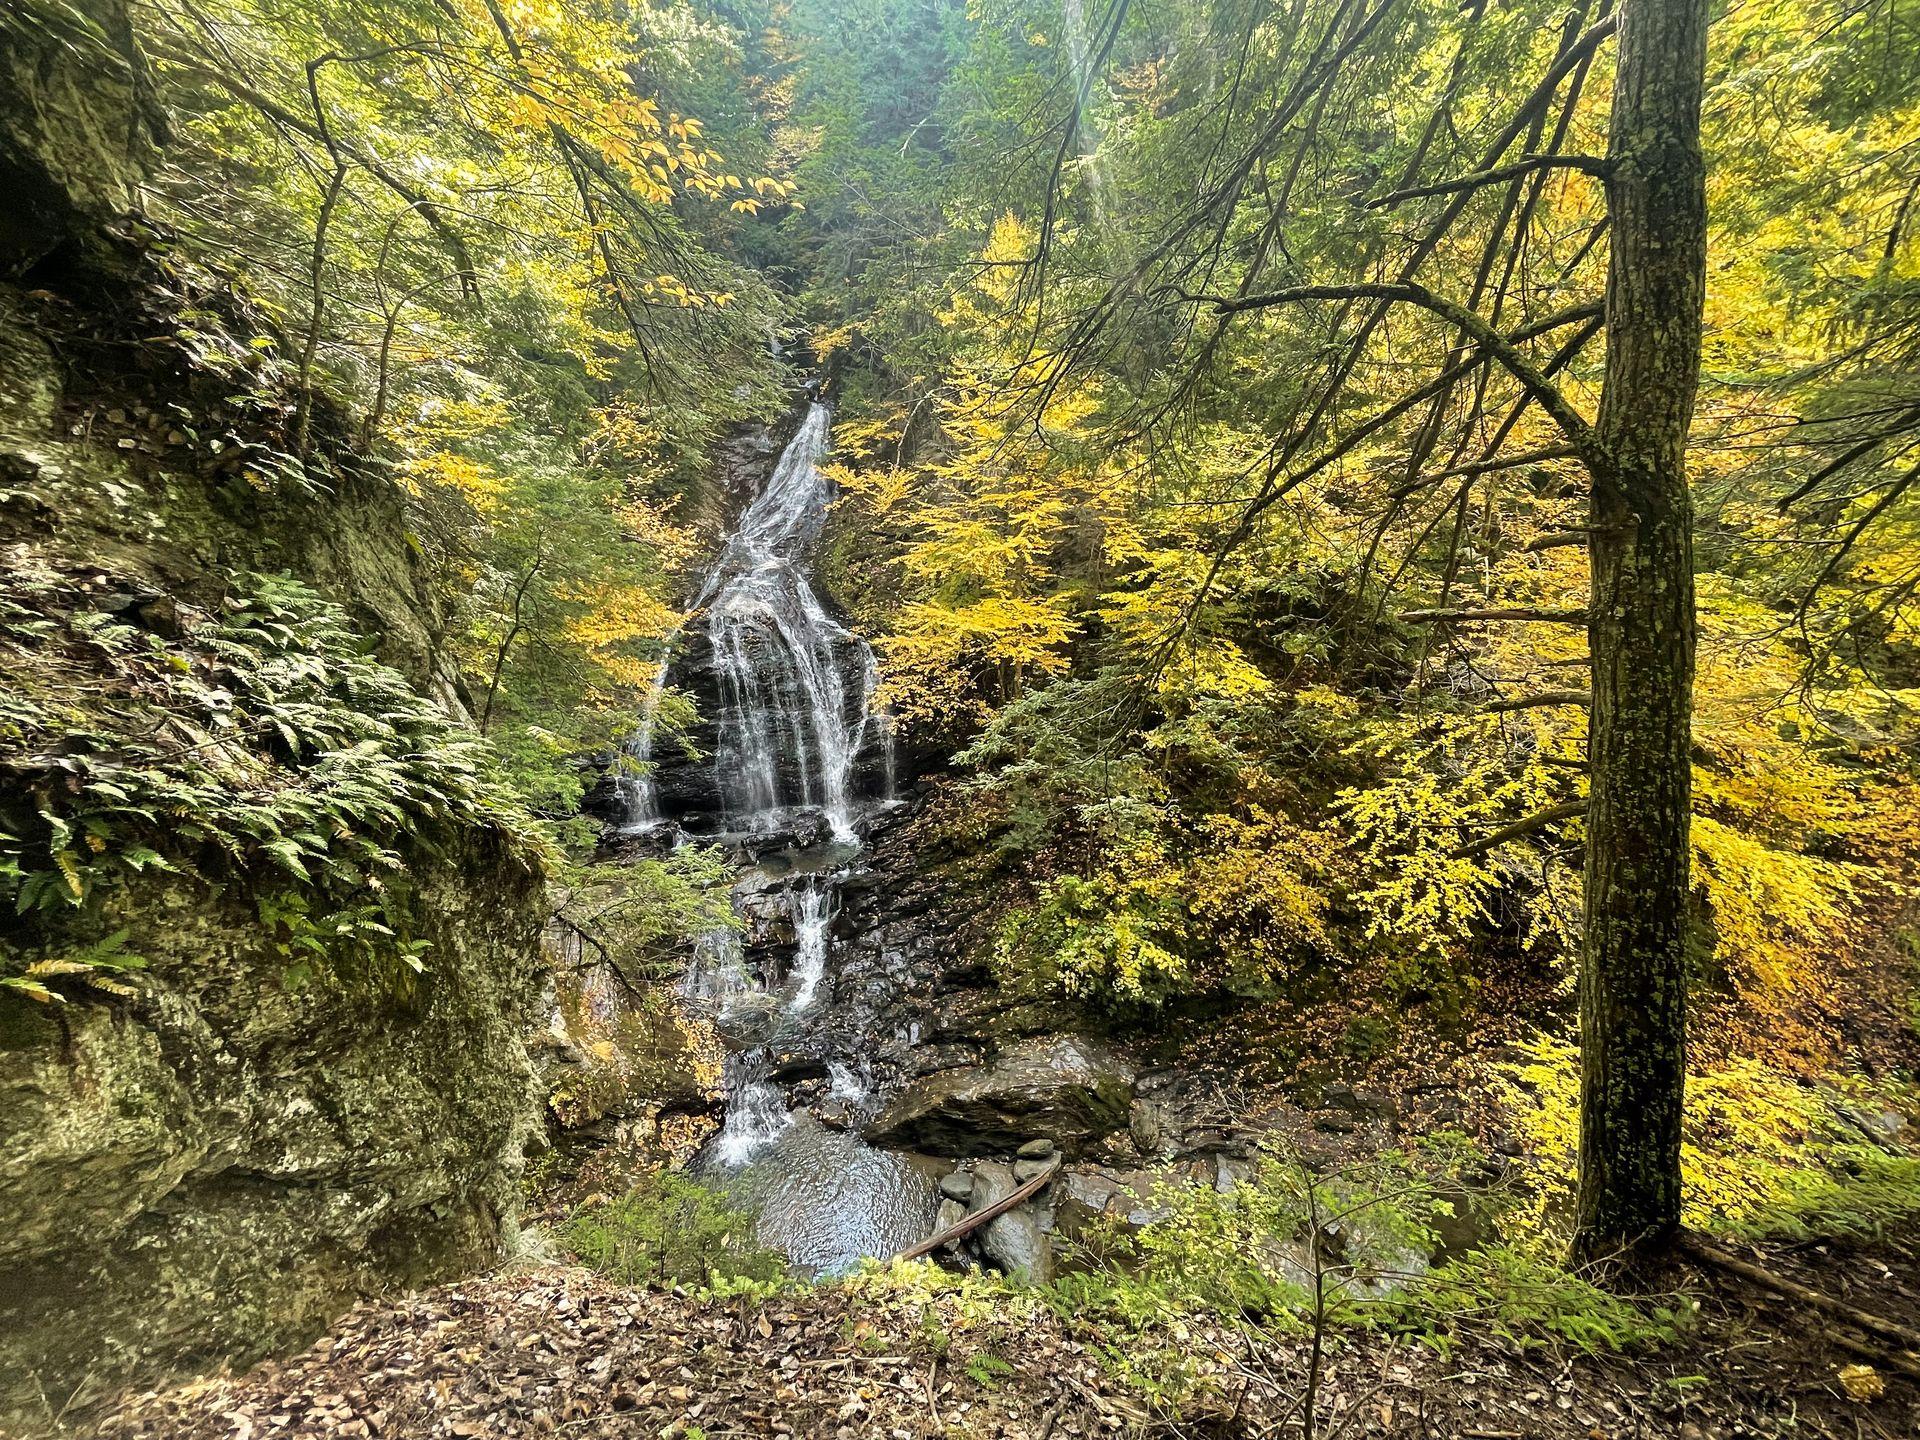 A small waterfall surrounded by trees and bits of yellow foliage.